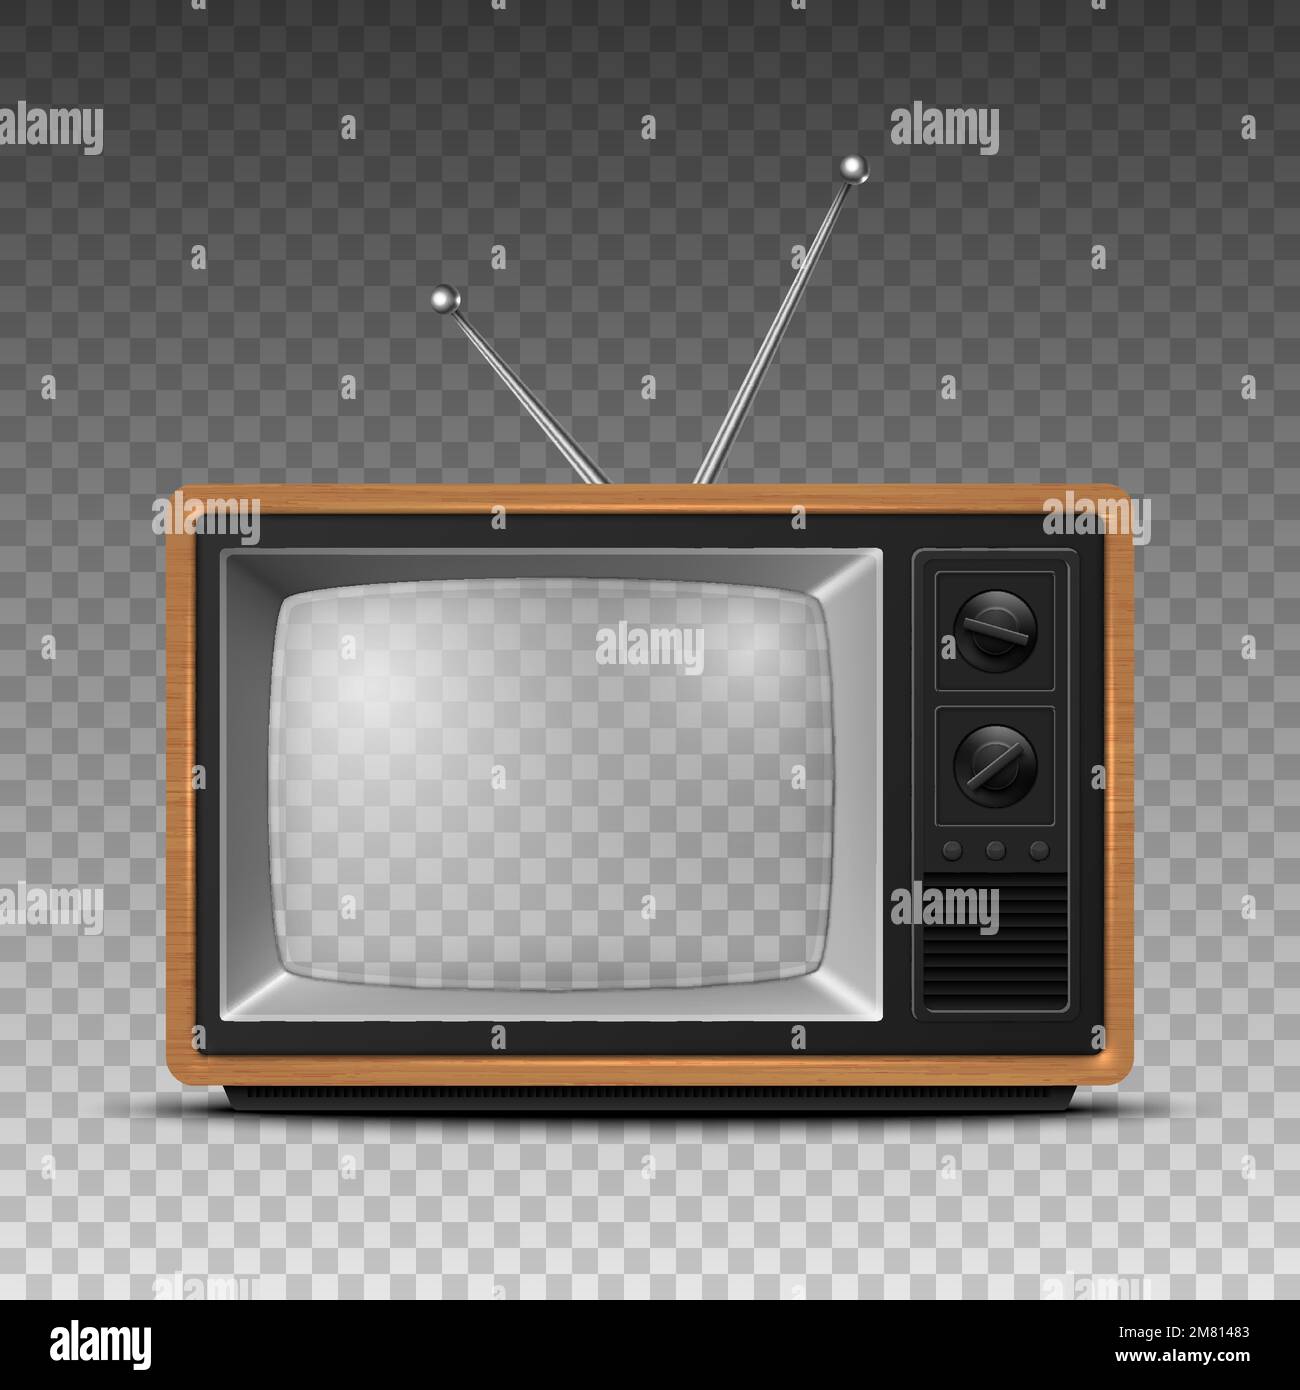 Vector 3d Realistic Brown Wooden Retro TV Receiver with Transparent Screen Isolated. Home Interior Design Concept. Vintage TV Set, Television, Front Stock Vector